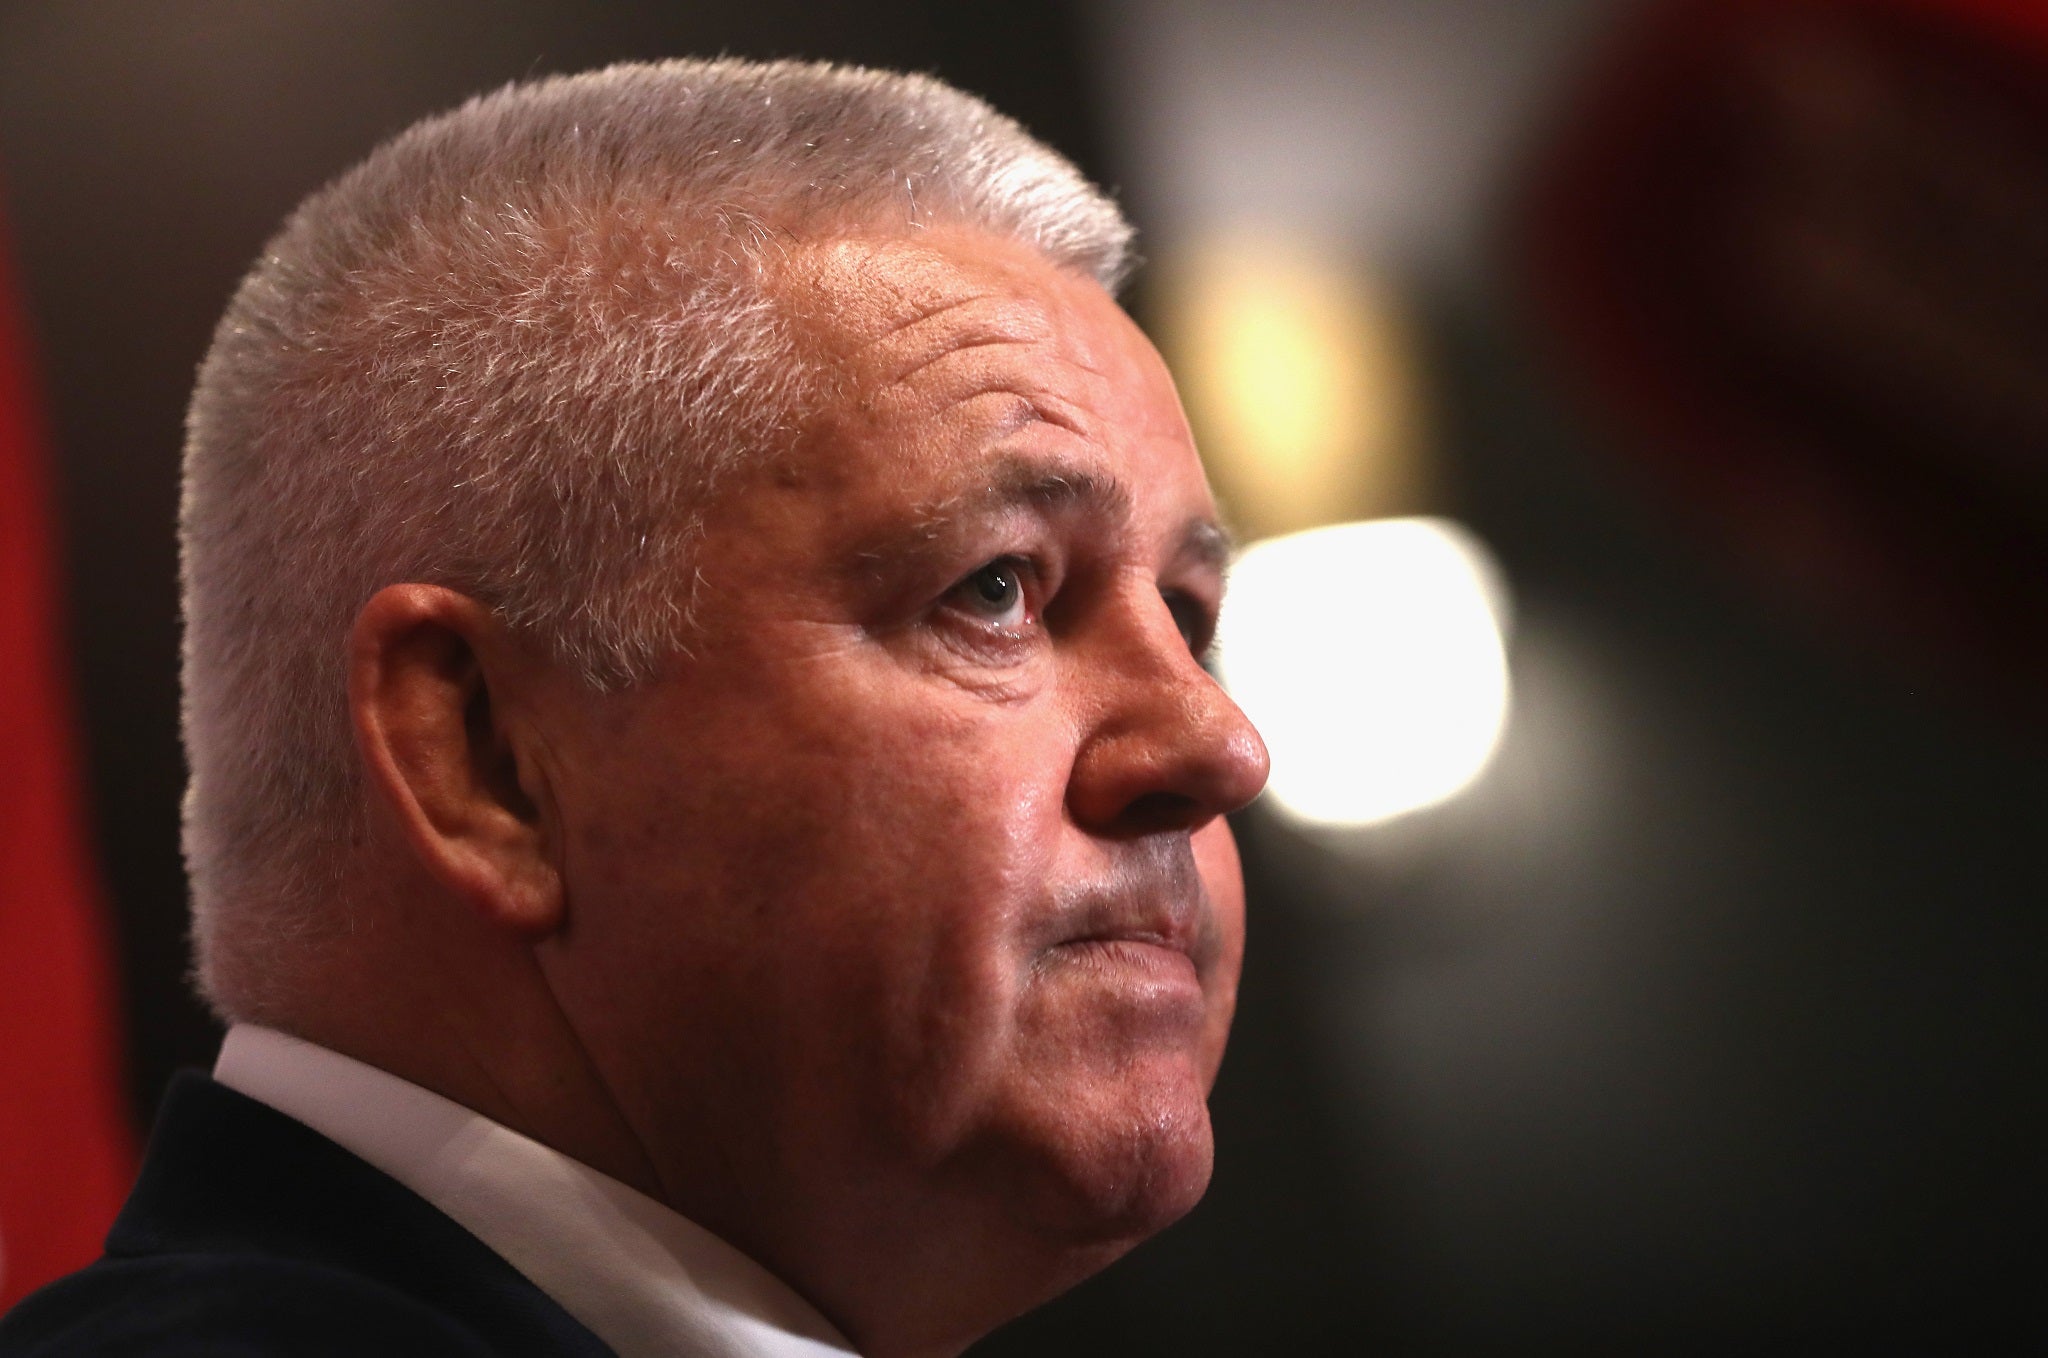 Warren Gatland will not want the Lions to suffer consecutive defeats before the Test series